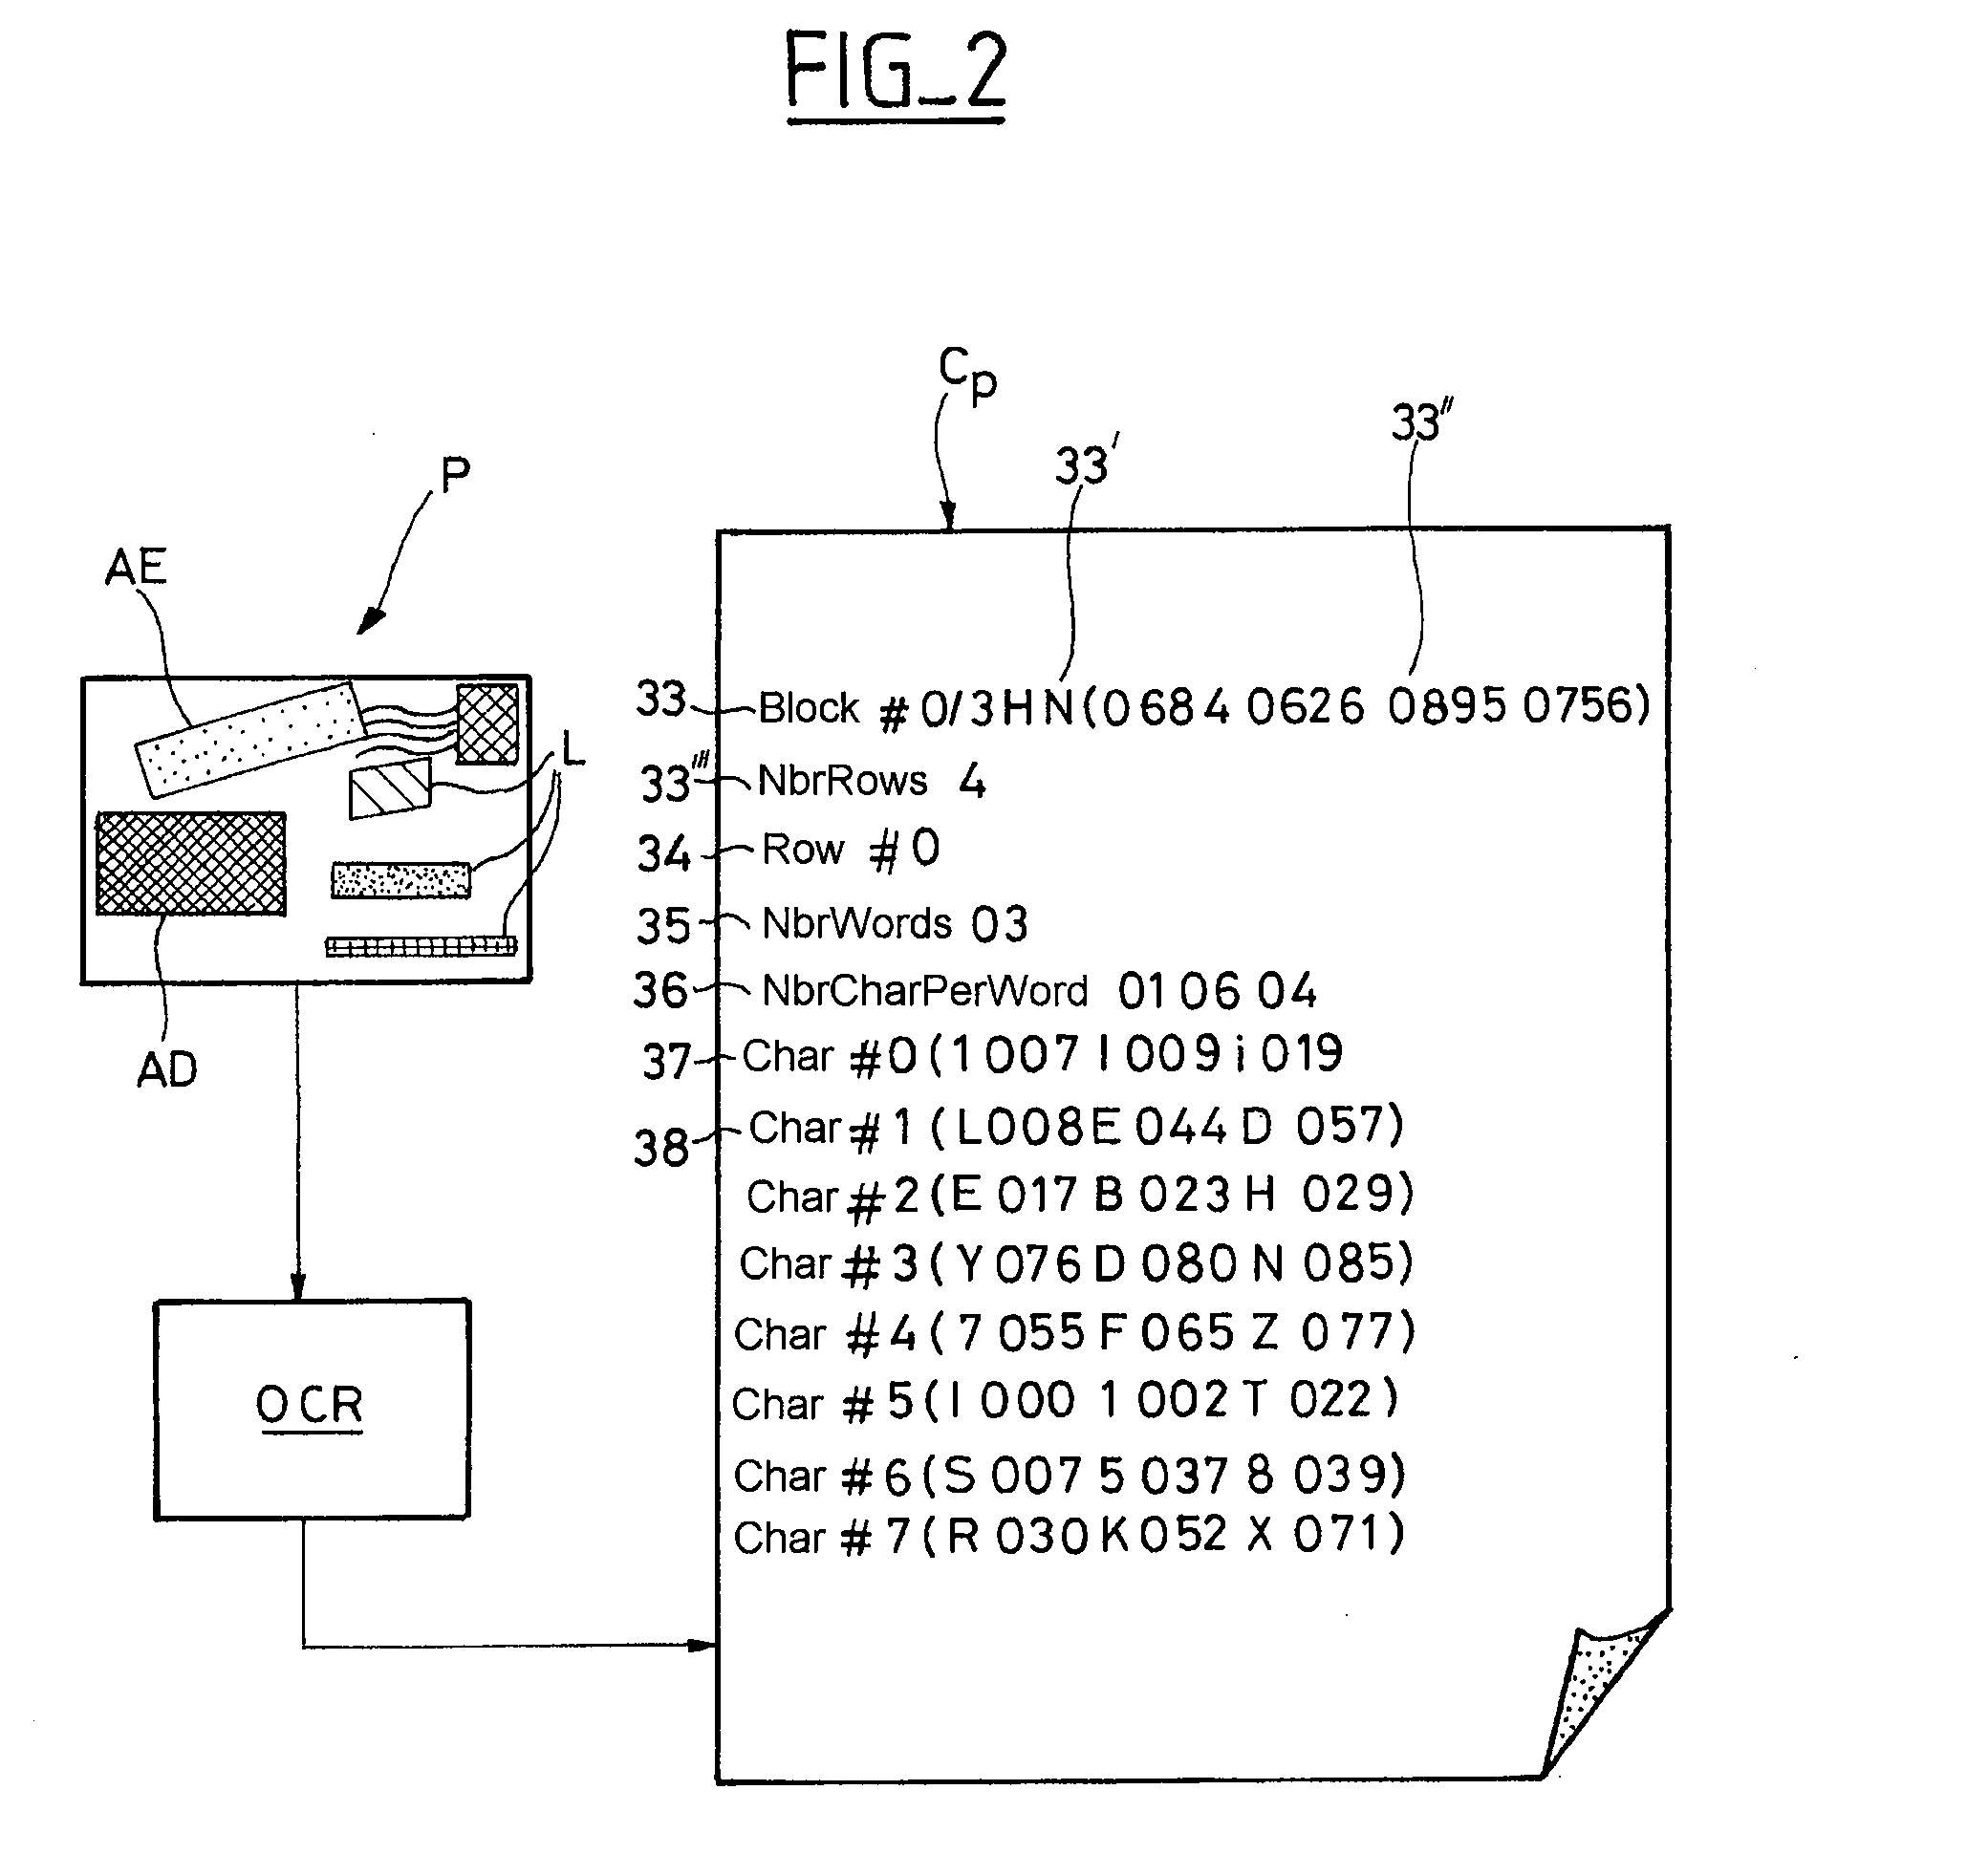 Method of Processing Mailpieces Using Customer Codes Associated With Digital Fingerprints